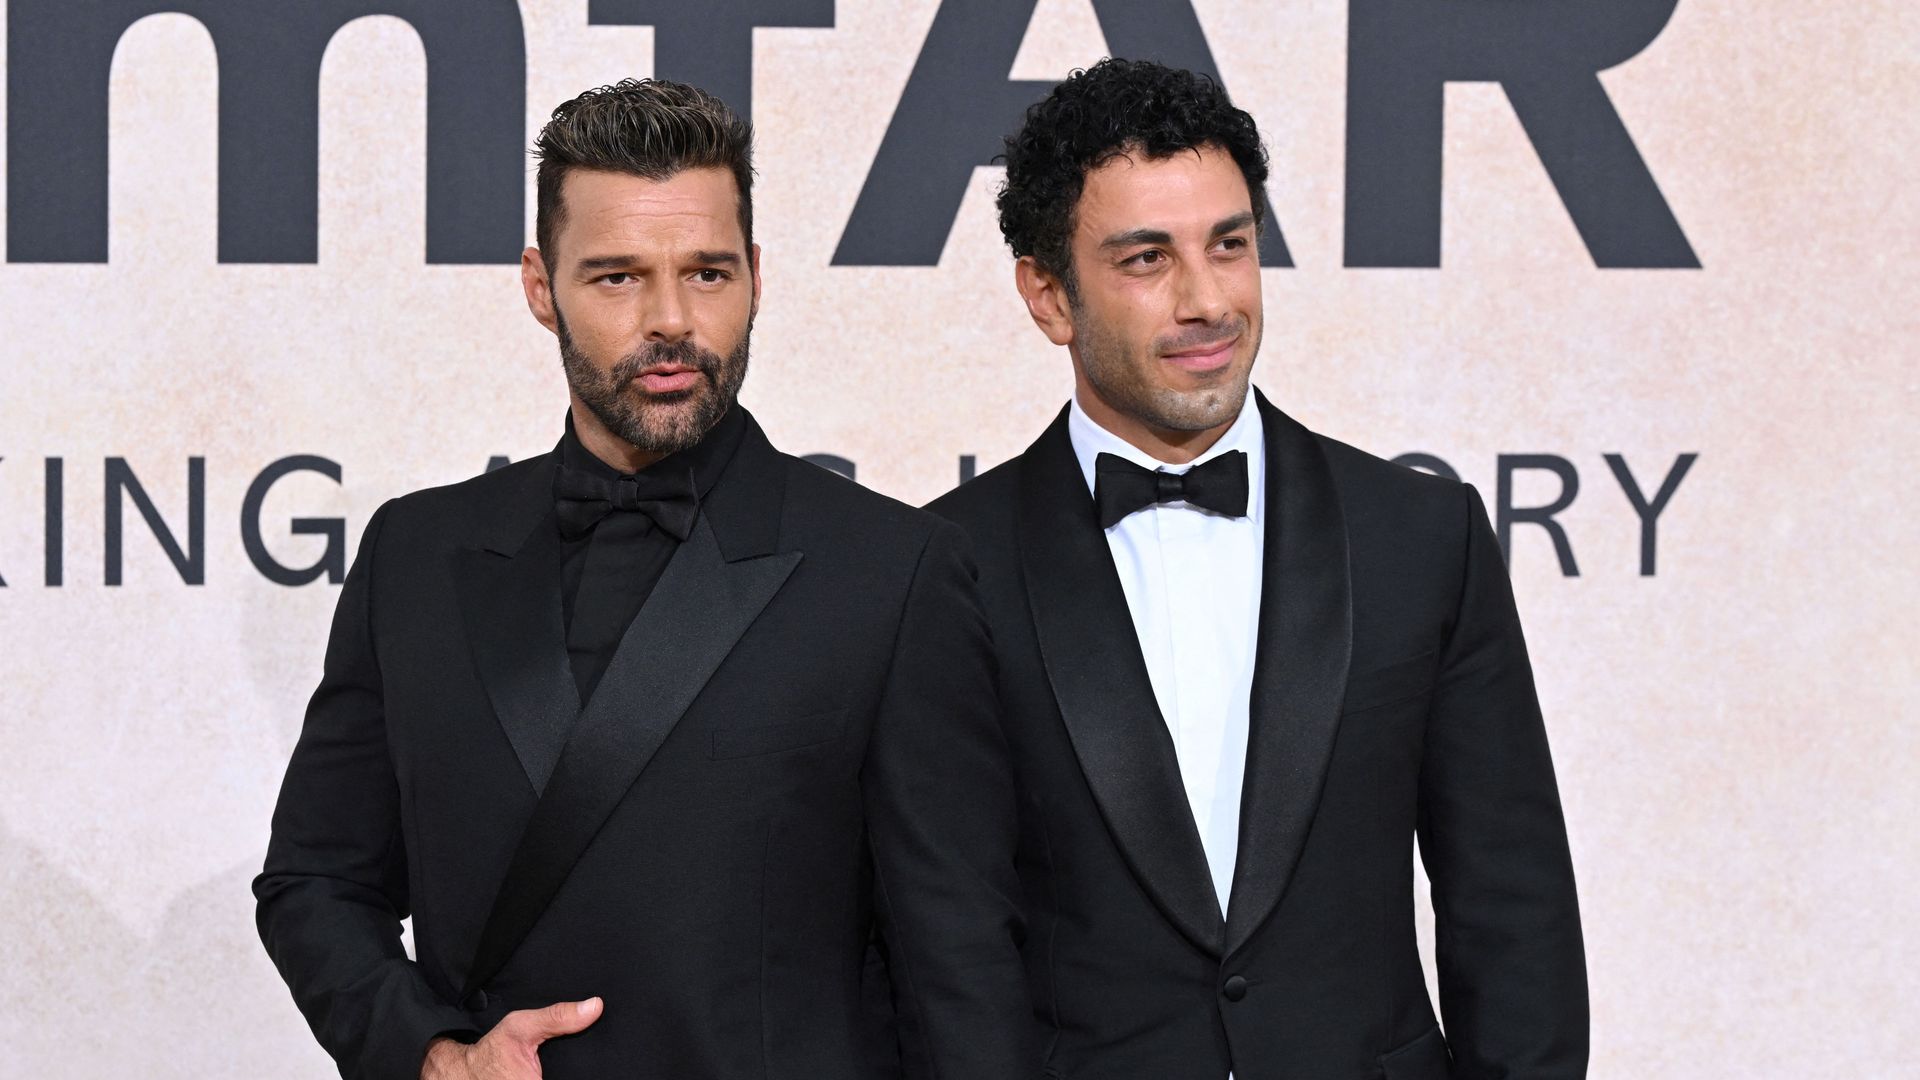 Ricky Martin is on tour with his daughter Lucia: Jwan Yosef spends time in Los Angeles